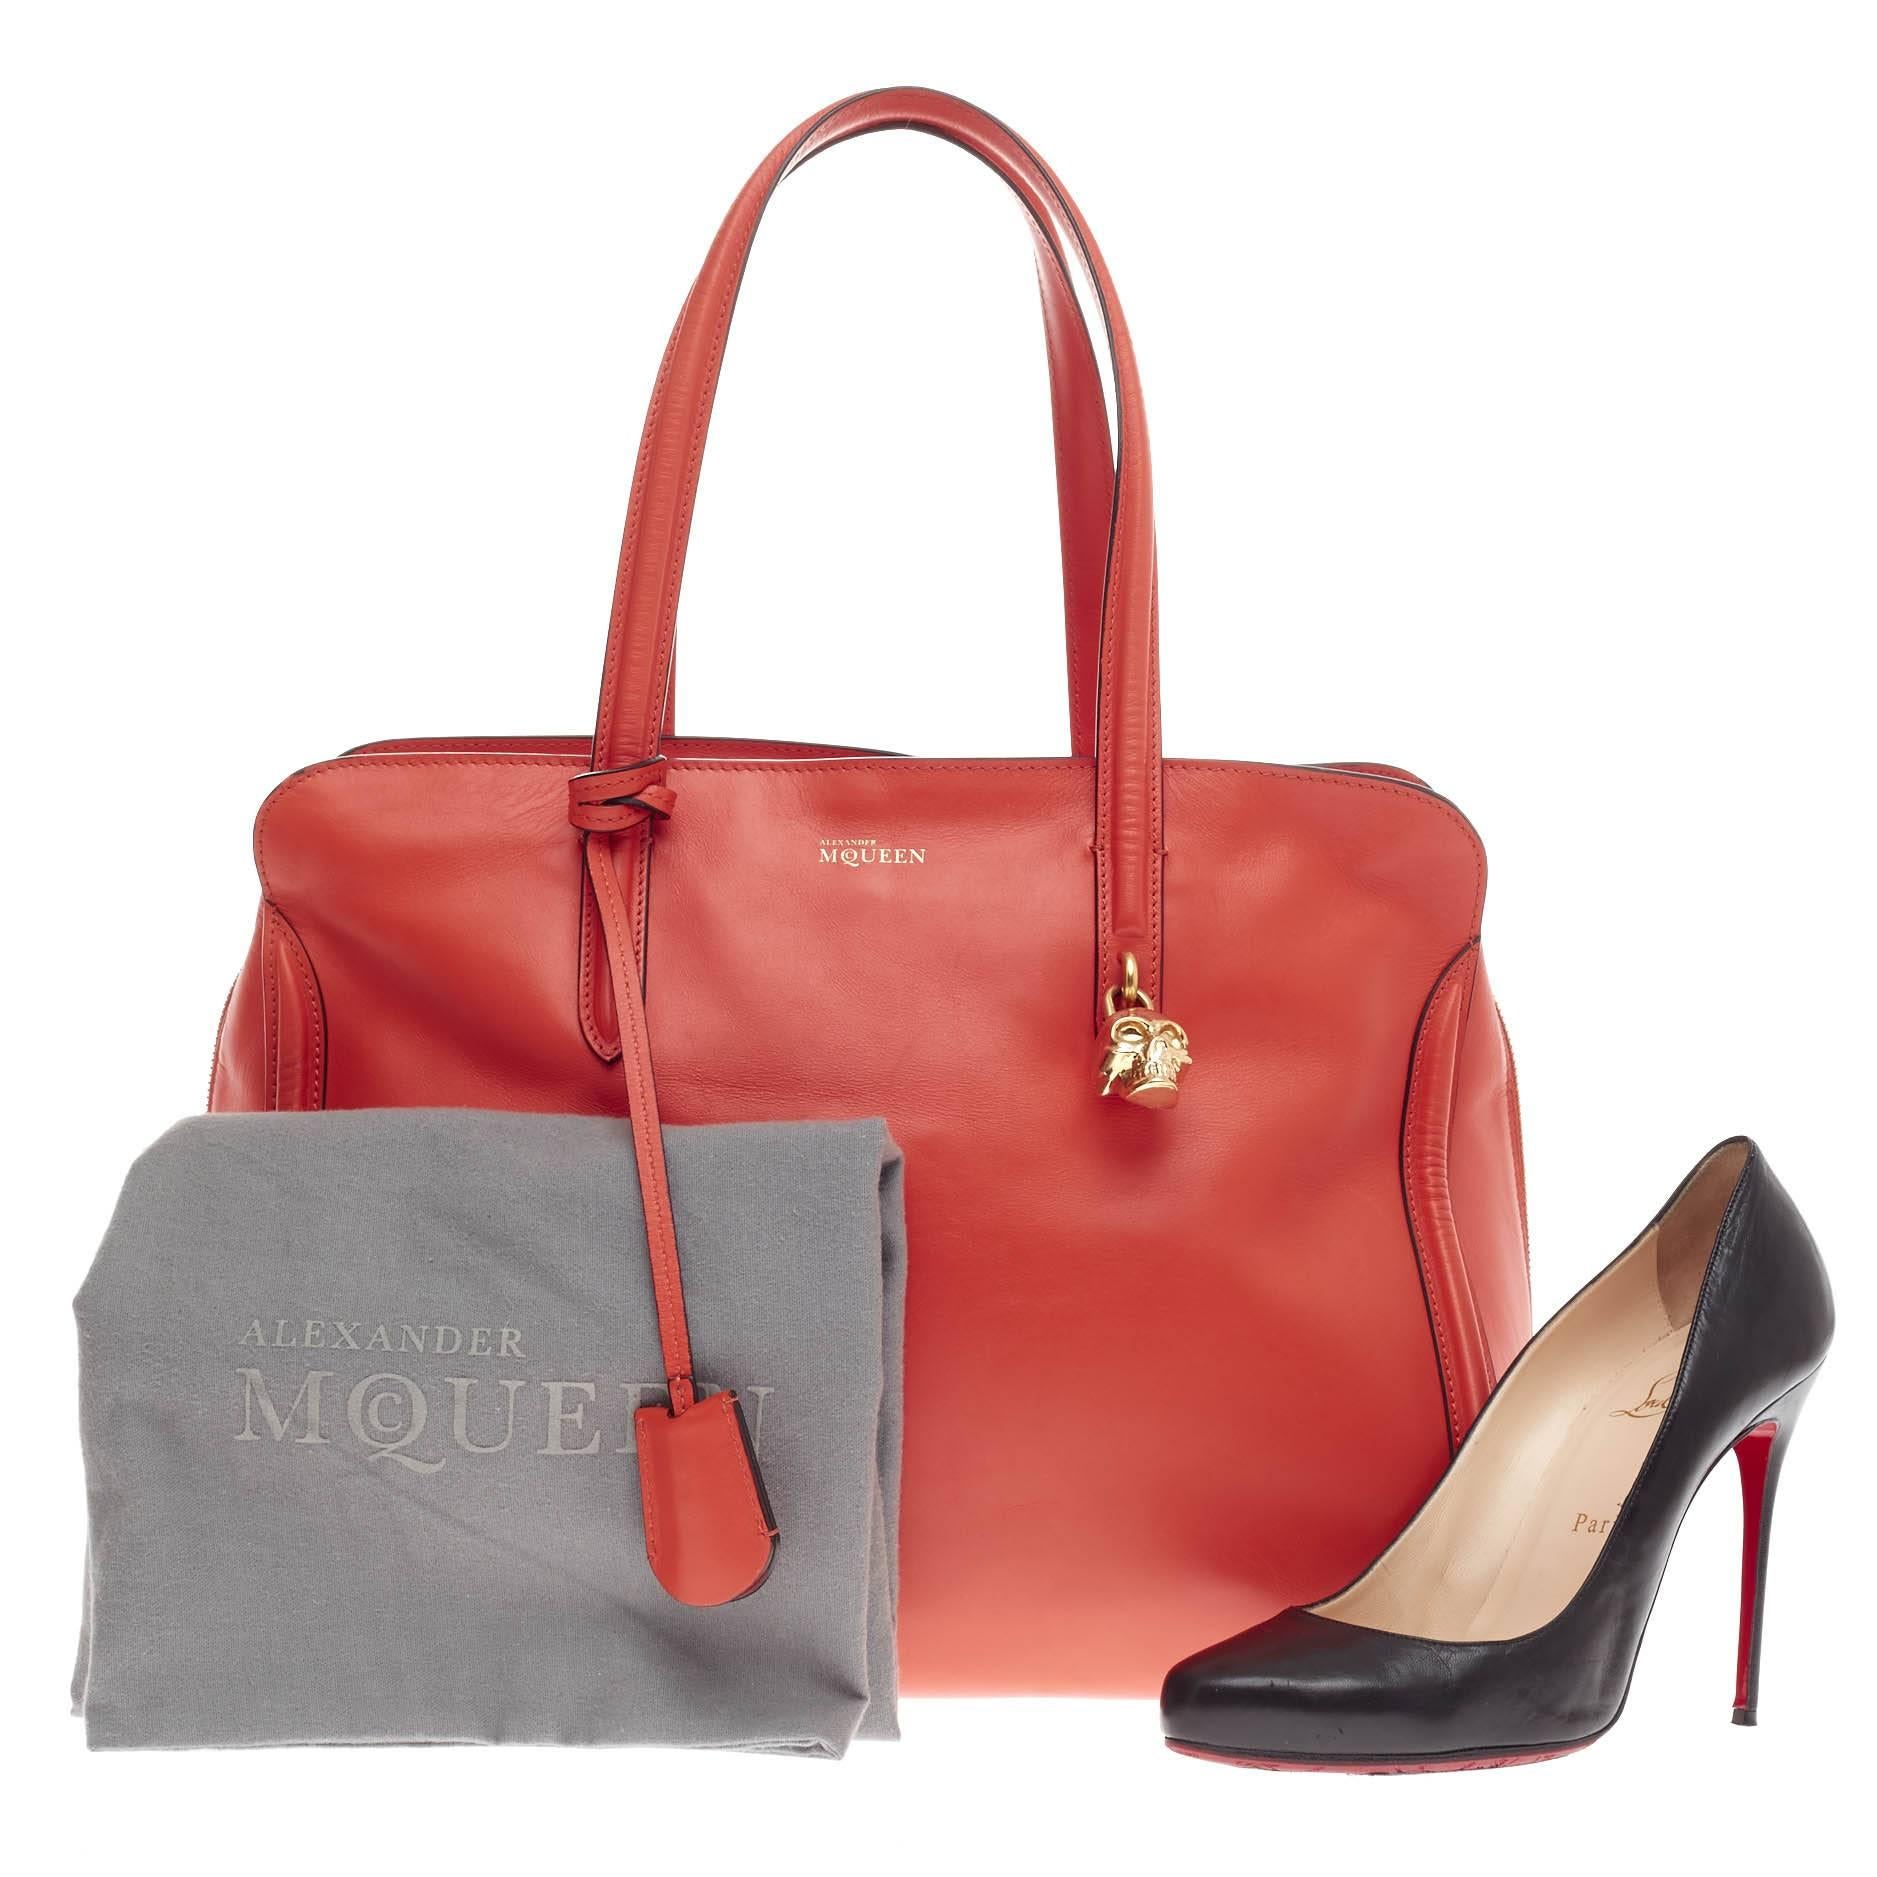 This authentic Alexander McQueen Padlock Zip Around Tote Leather Medium is a sleek and stylish accessory made for every fashionista. Crafted in stunning orange leather, this functional tote features dual flat handles, defined edges, signature gold